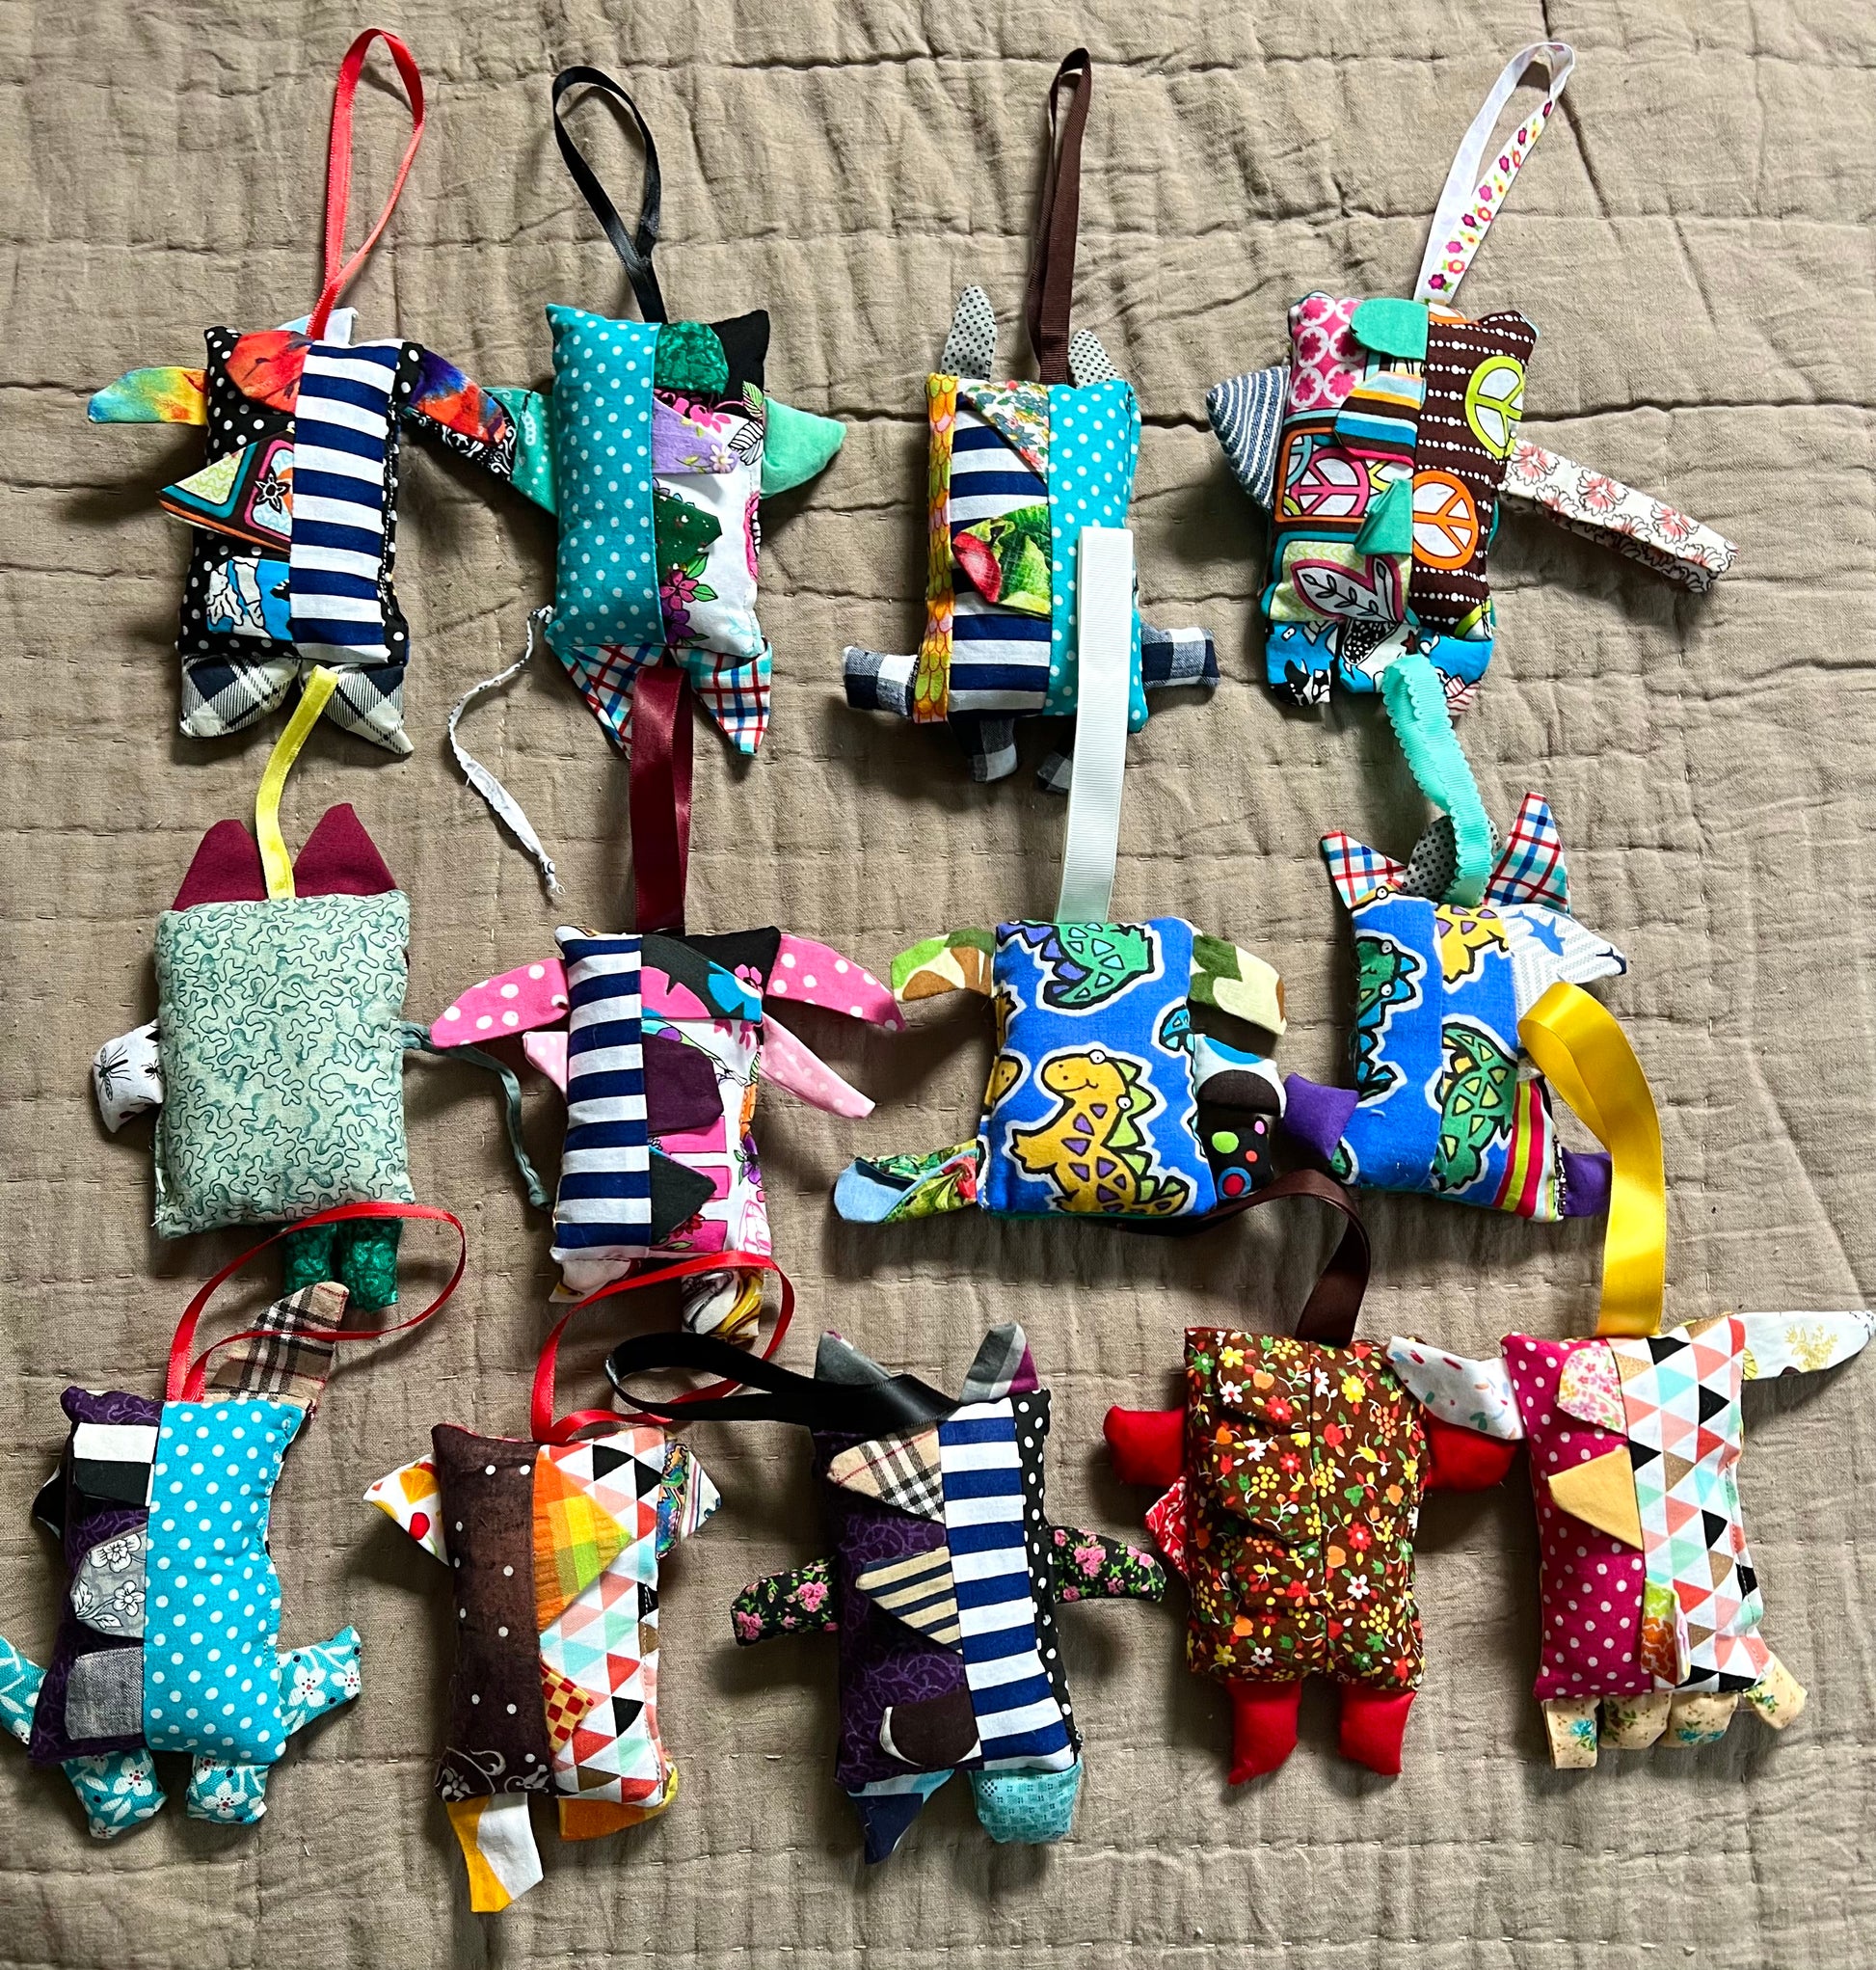 back view of mini monster keychain ornaments, aerial view flat lay.